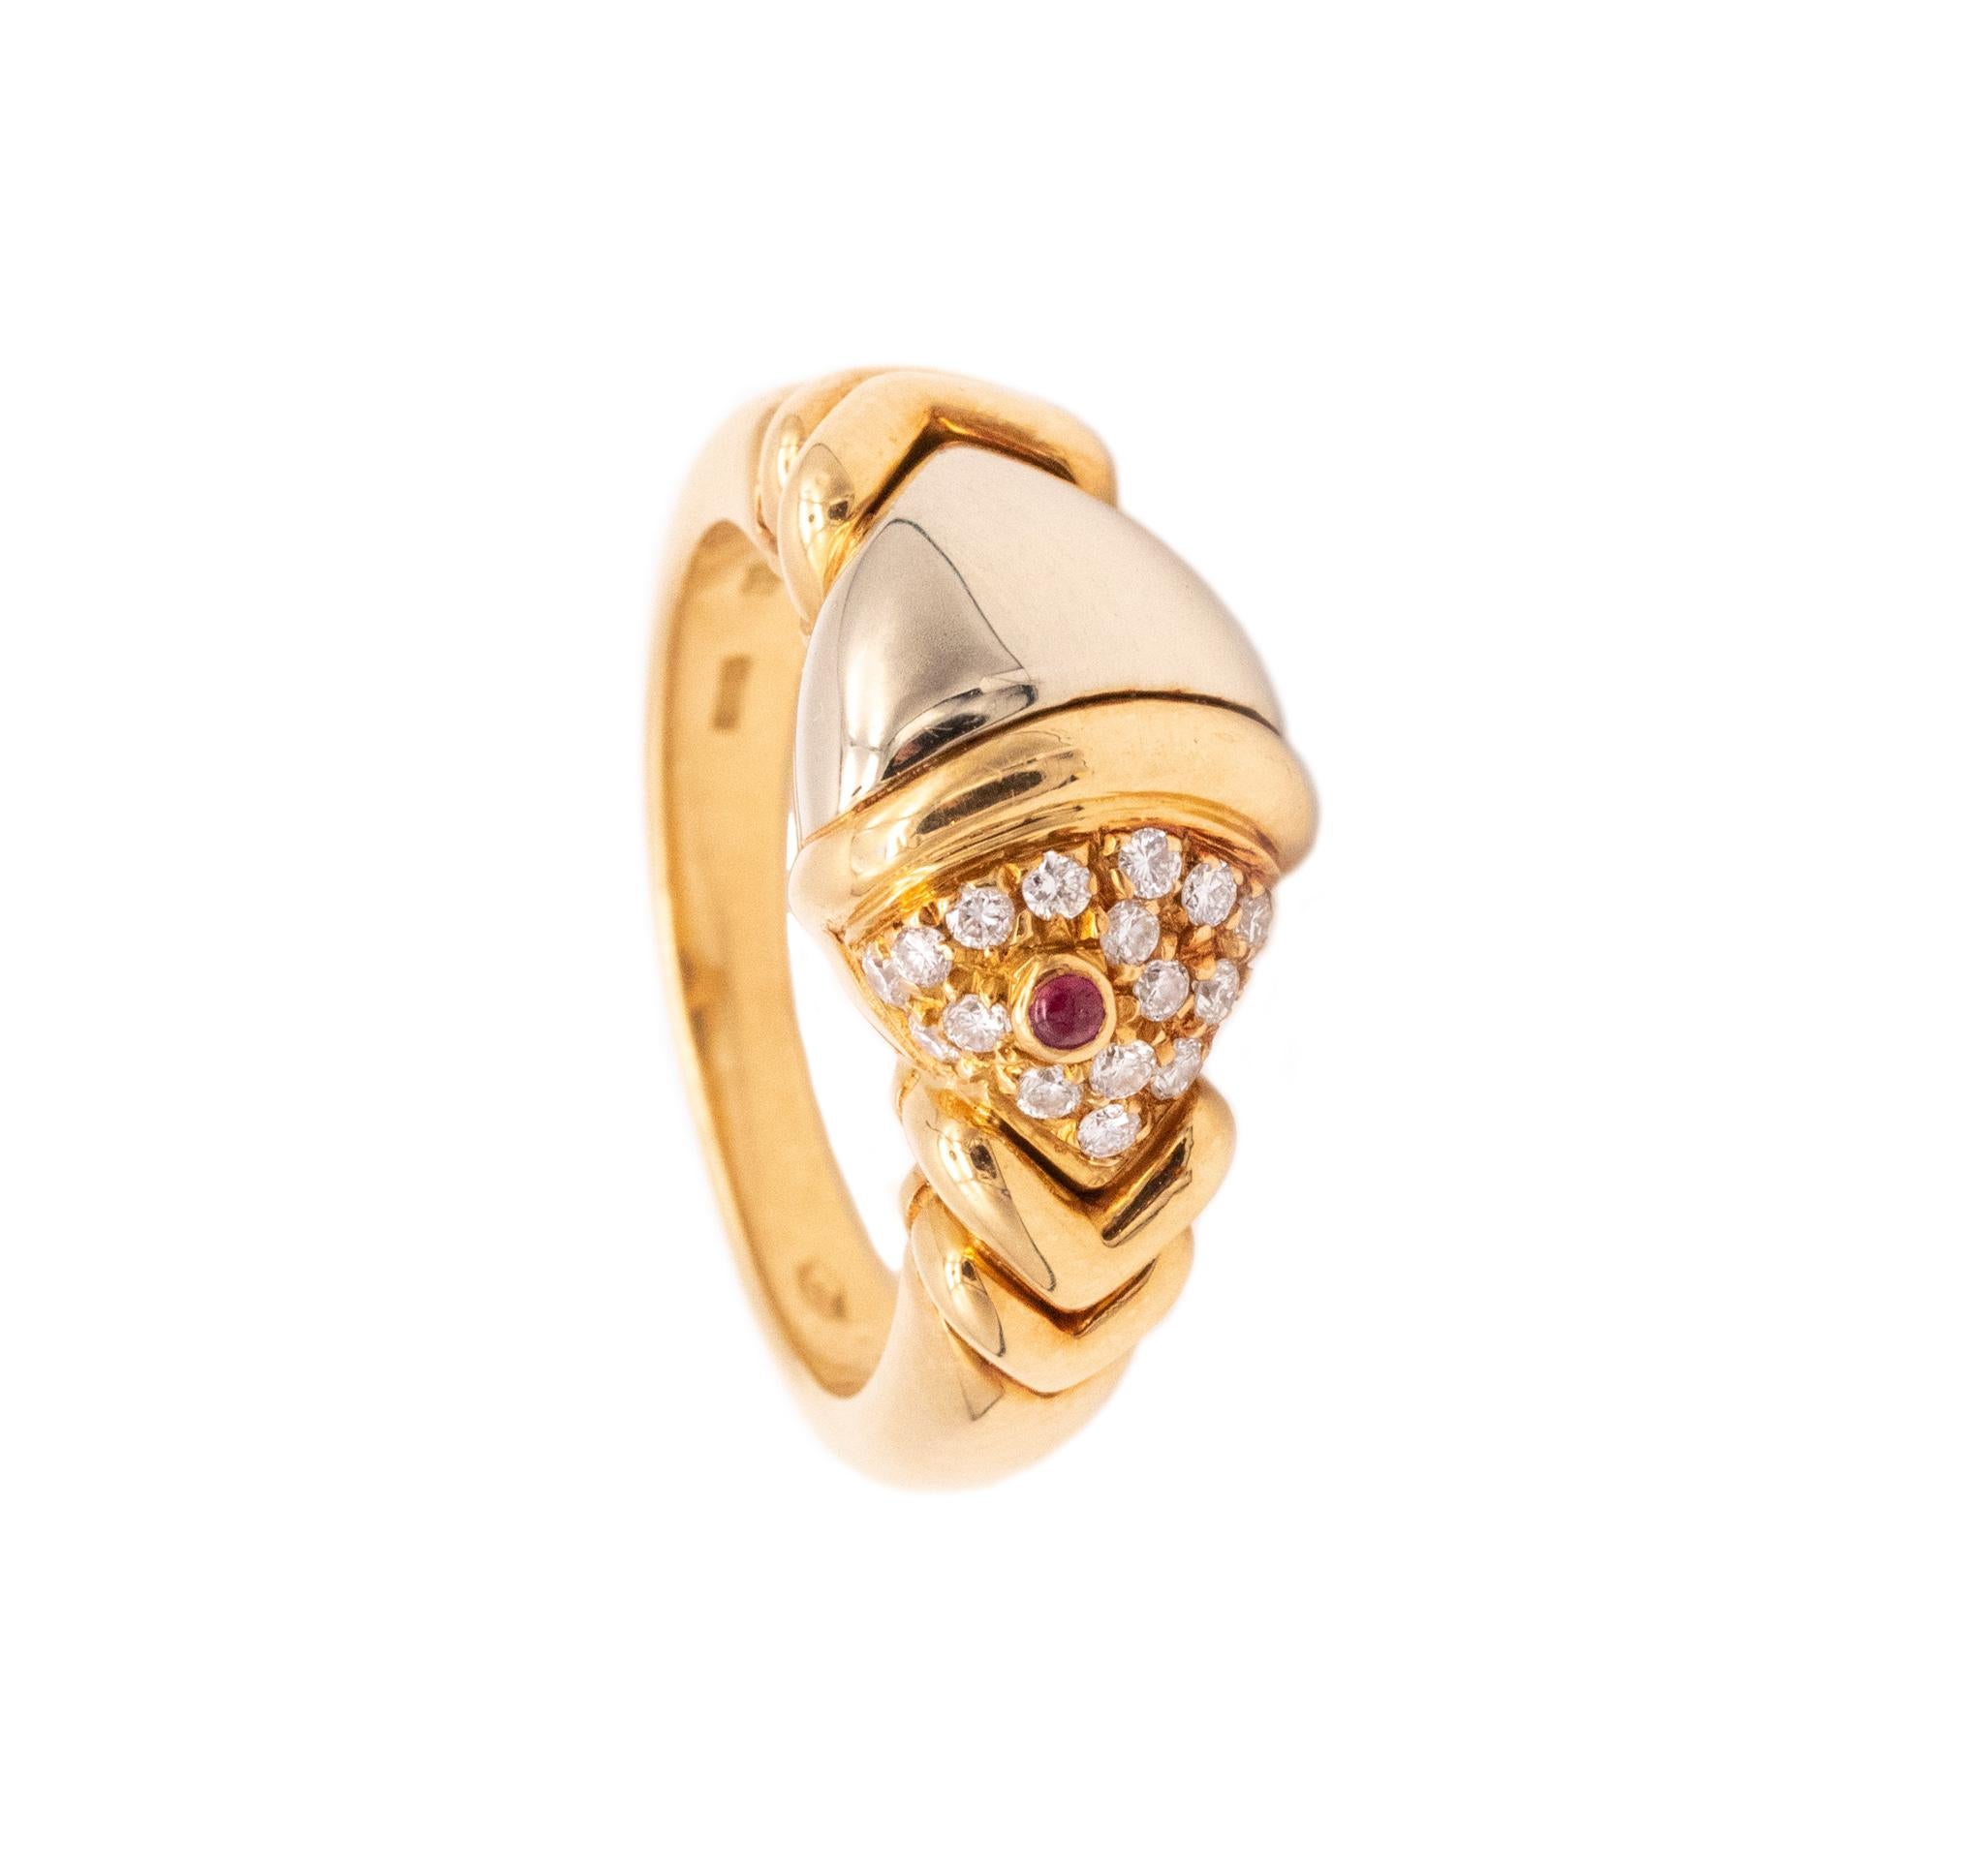 A ring in the shape of a fish designed by Bvlgari.

Very youthful vintage piece created by the house of Bvlgari in the shape of an stylized fish and crafted in solid 18 karats of yellow and white gold.

Set with 21 round brilliant cut diamonds (0.22